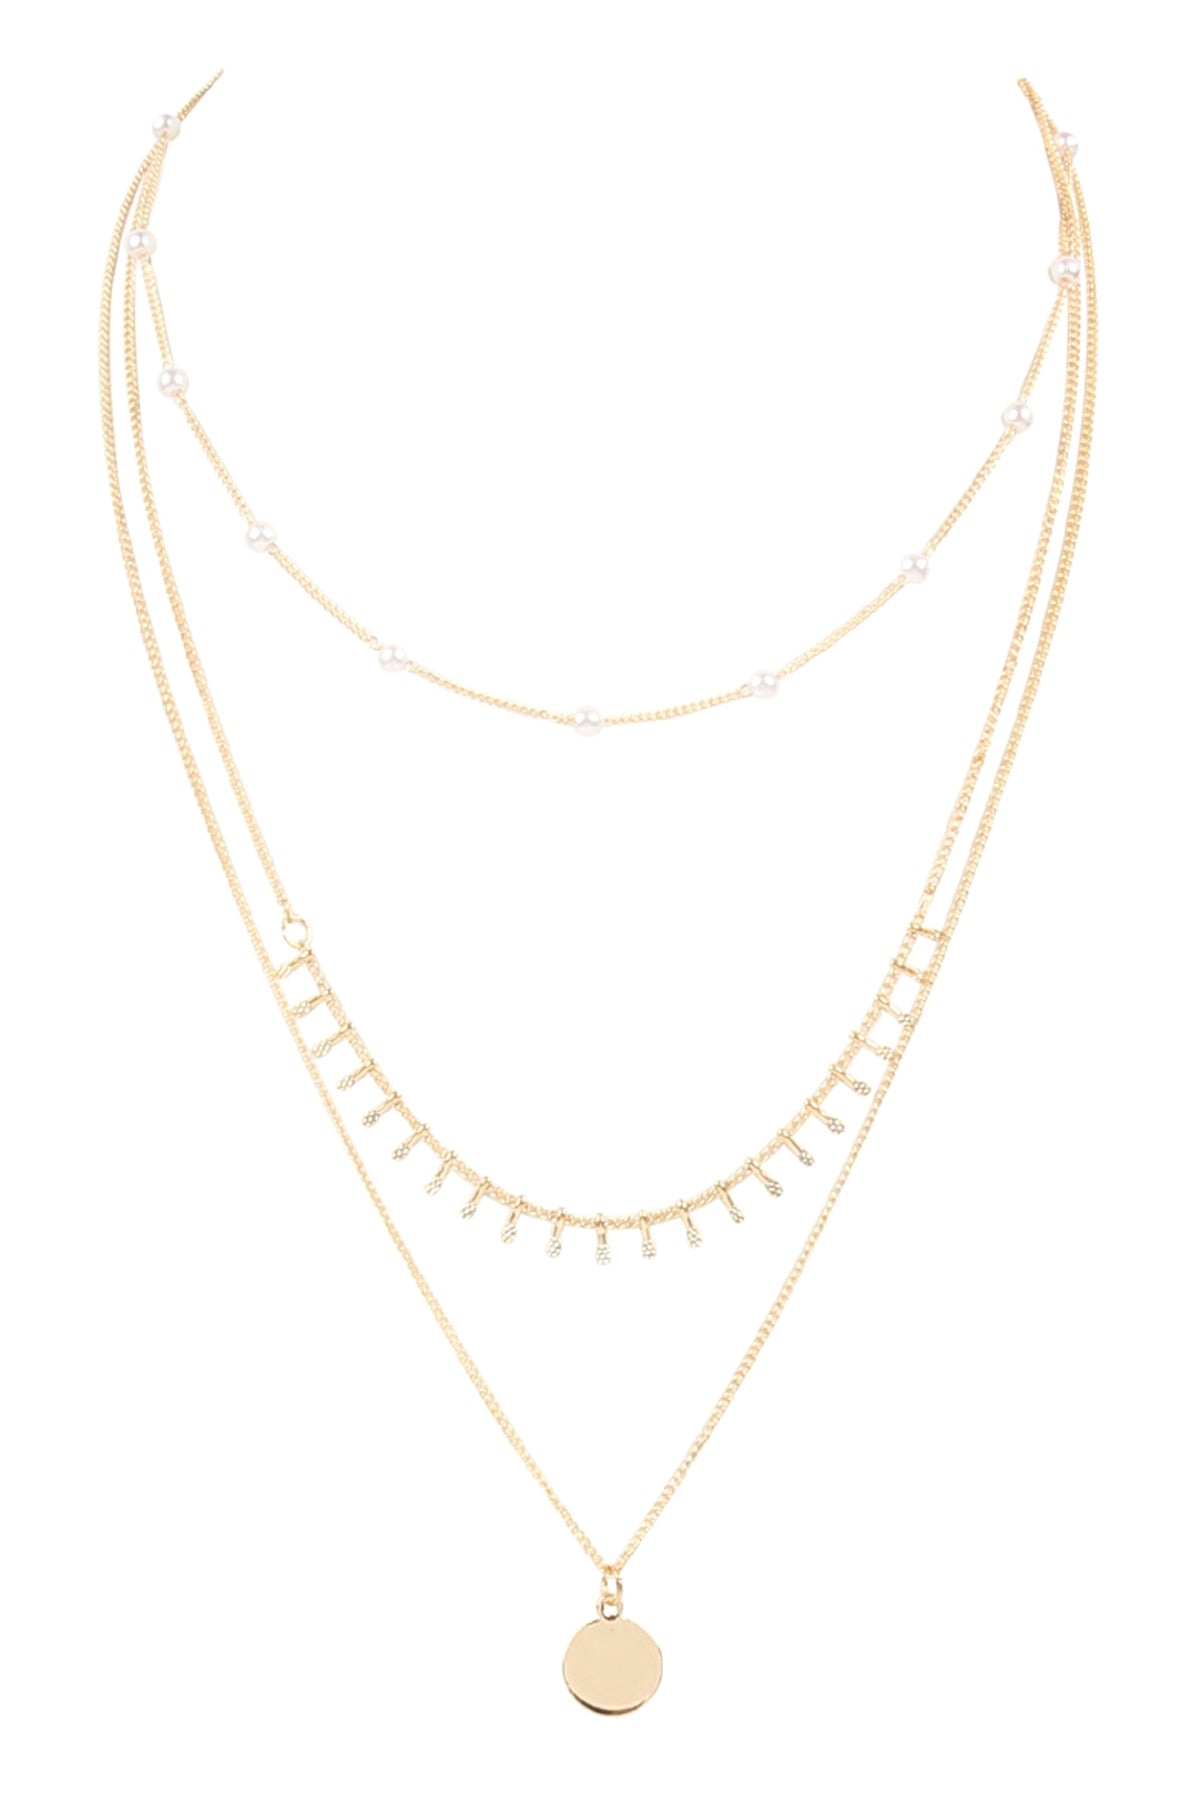 S17-4-3-HDN2644G GOLD 3 LAYERED CHAIN NECKLACE WITH PENDANT/6PCS